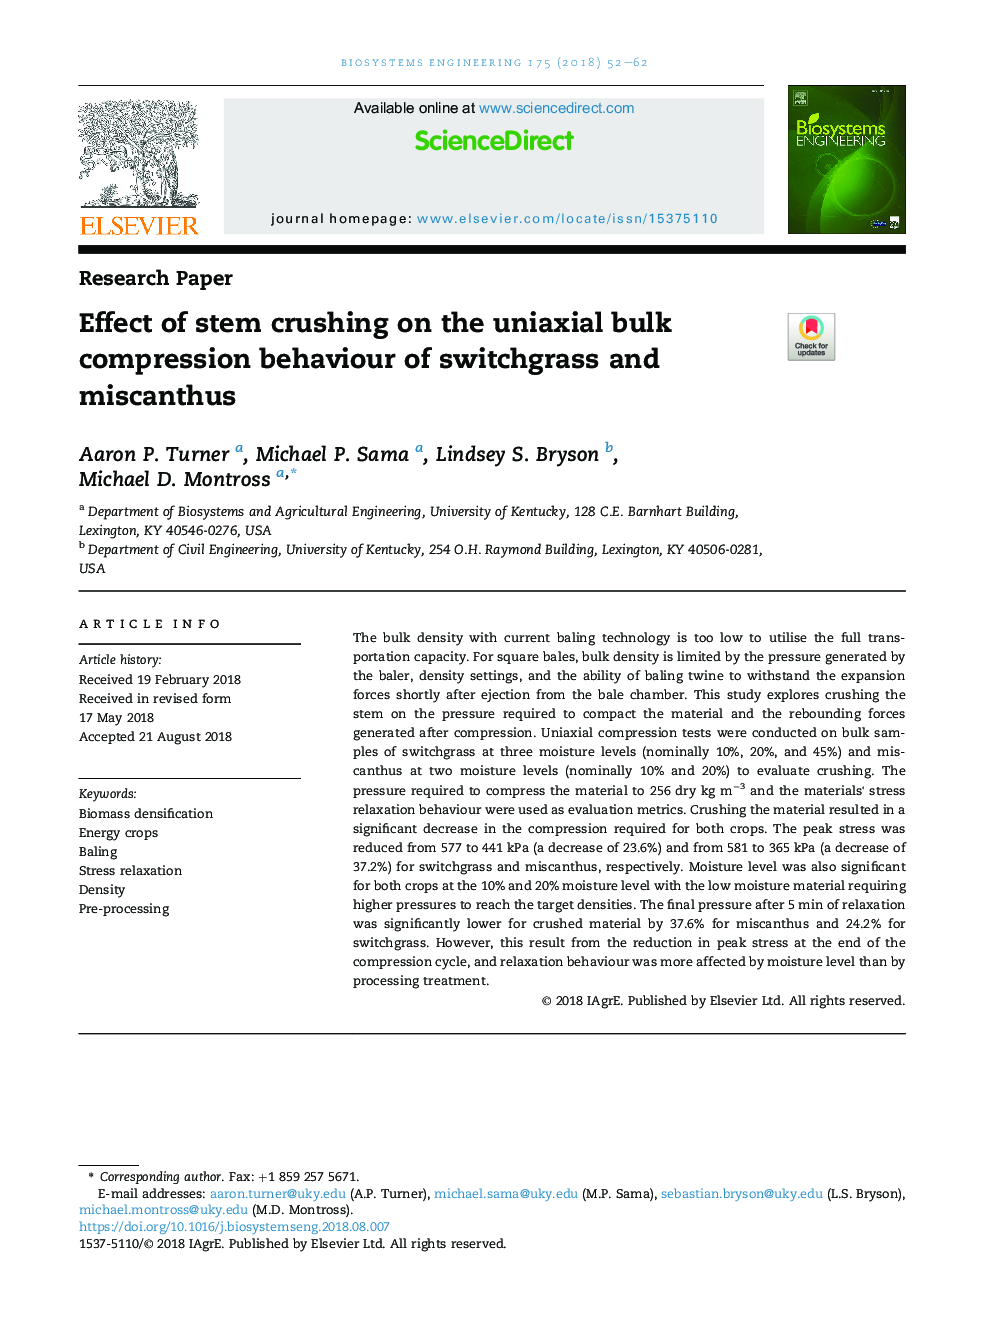 Effect of stem crushing on the uniaxial bulk compression behaviour of switchgrass and miscanthus